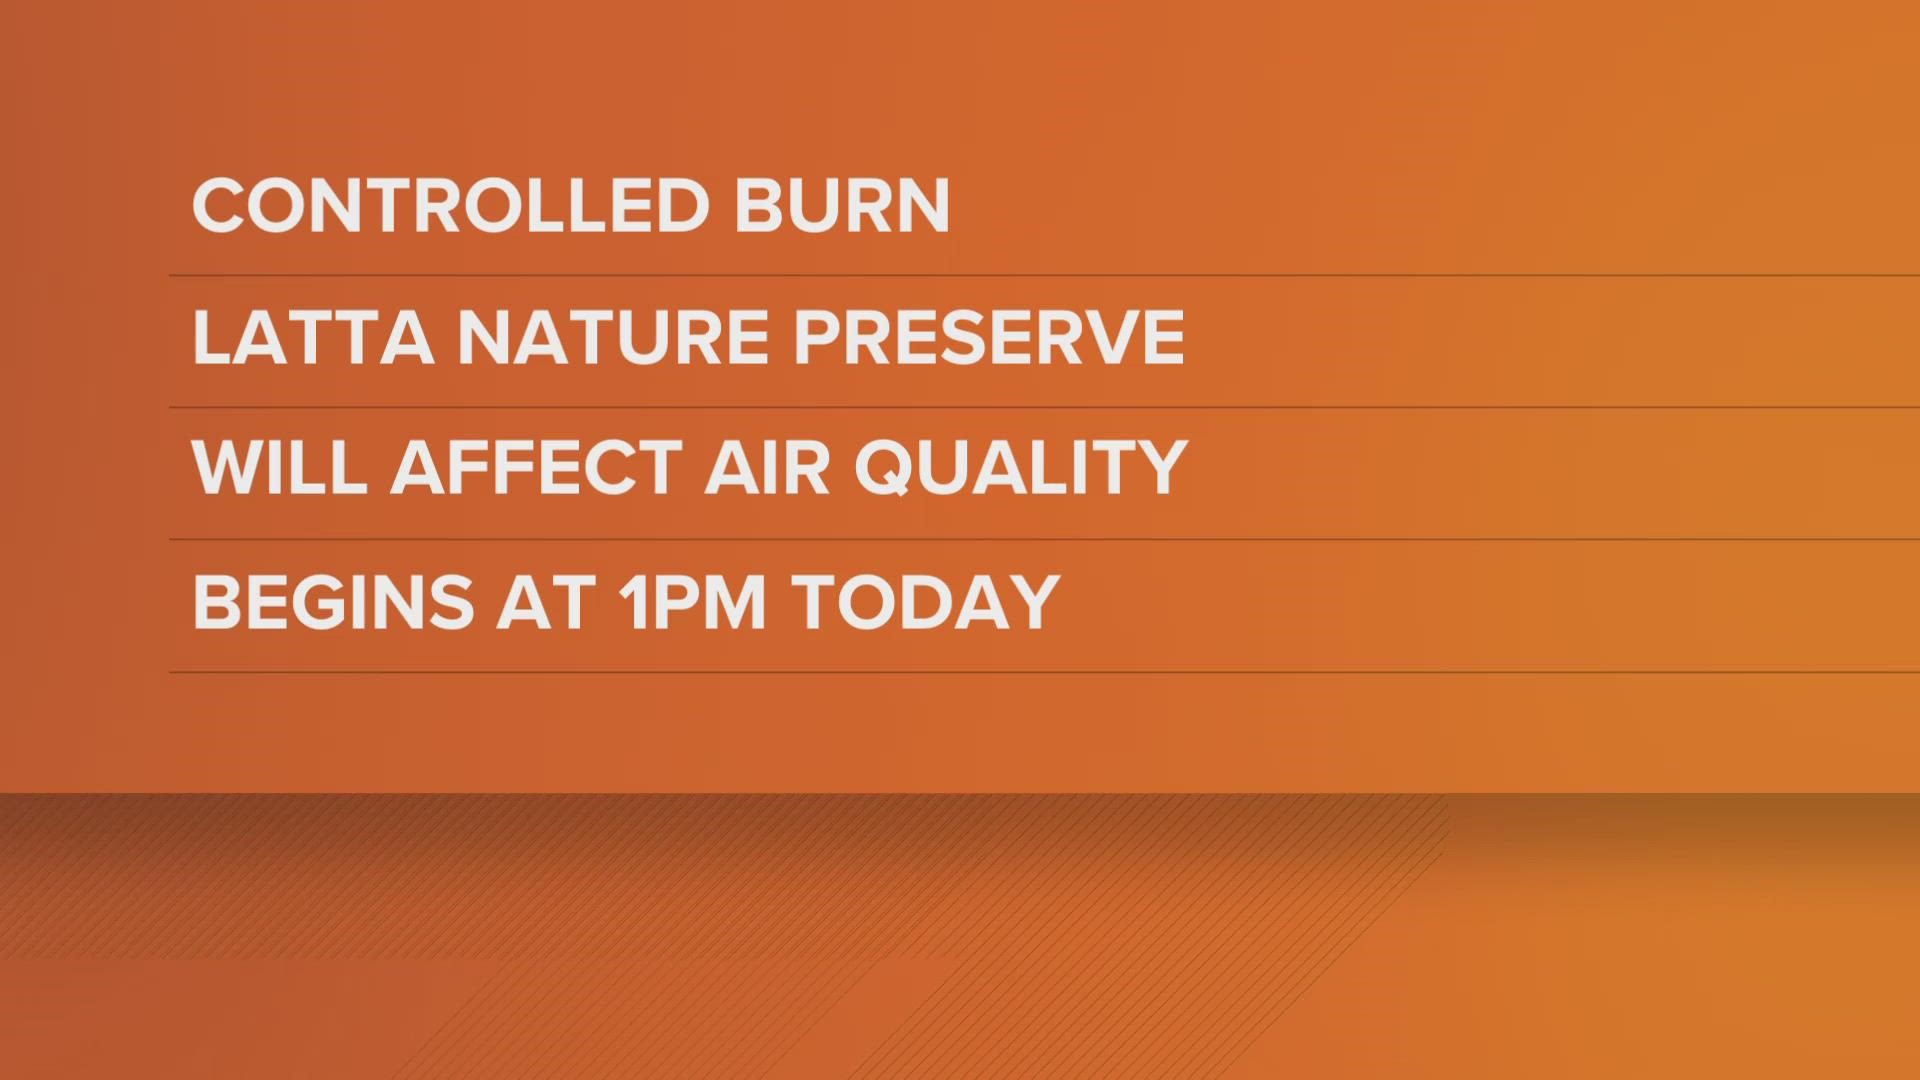 The Mecklenburg County Natural Resources staff says they'll be conducting a controlled burn.